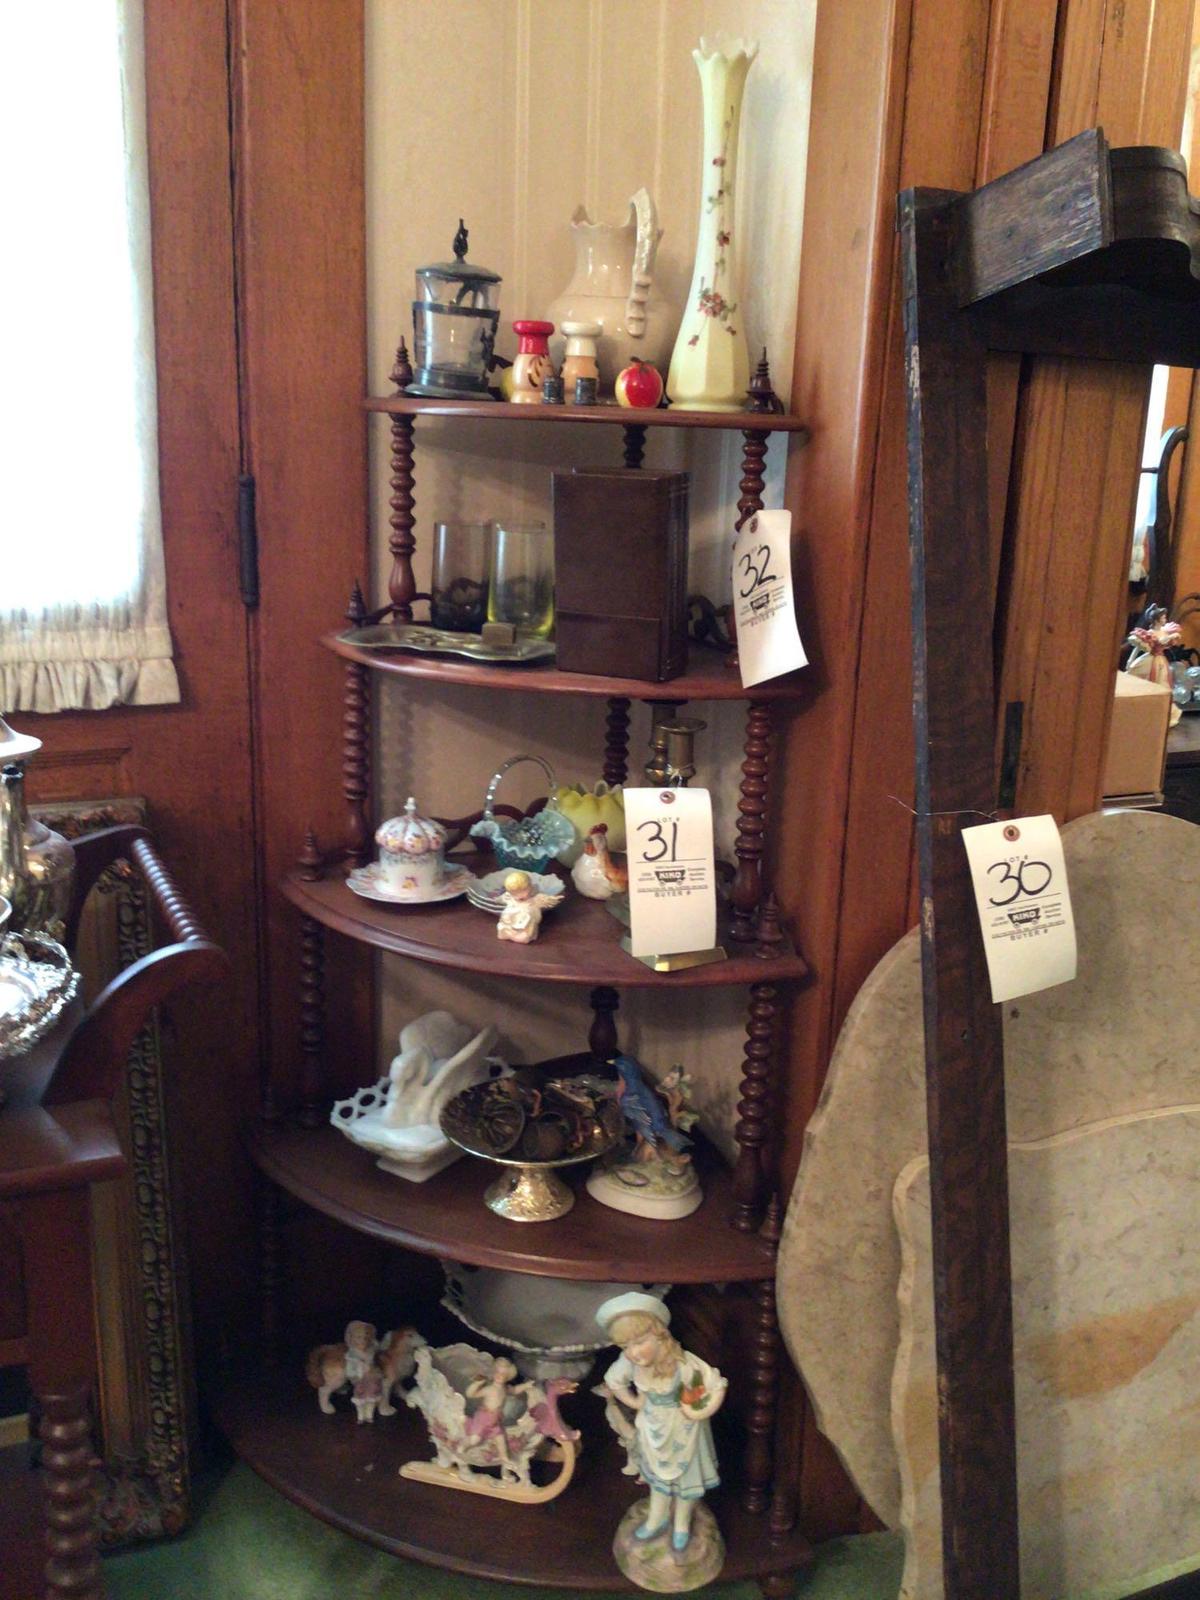 Contents of corner stand including figurines glassware and Fenton